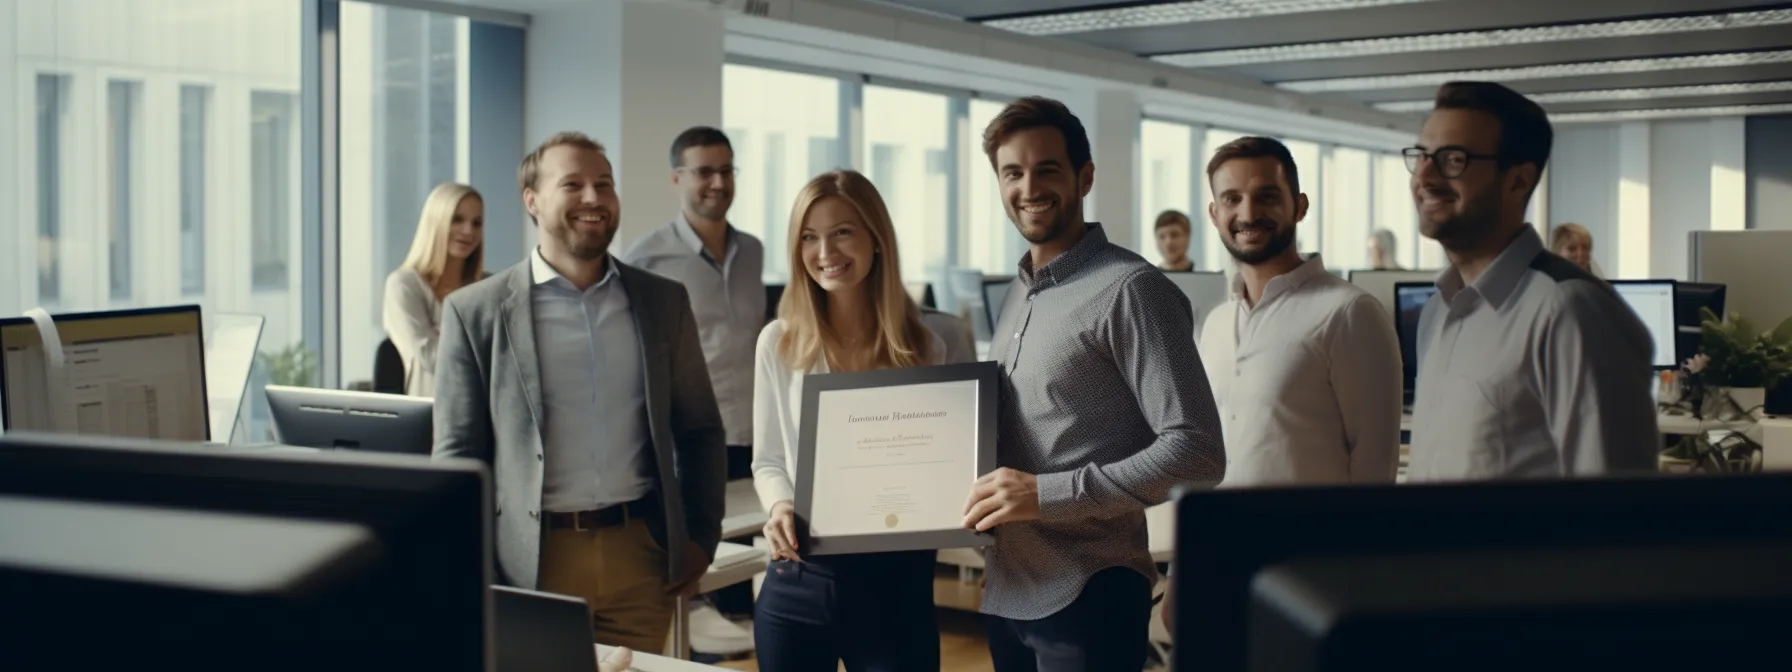 a group of professionals holding seotheory certificates and confidently discussing digital strategies in a modern office setting.